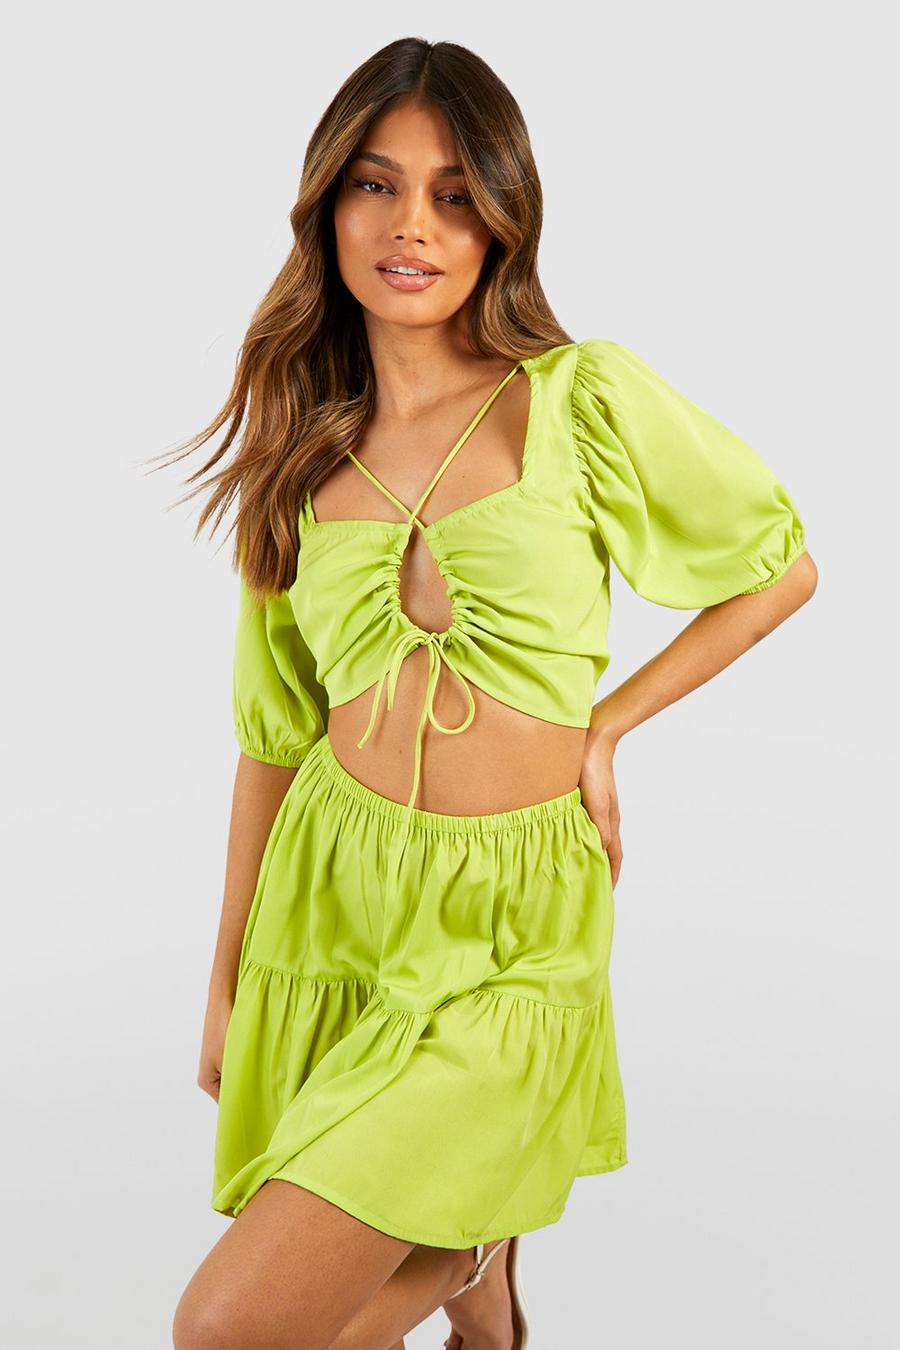 Chartreuse Strappy Sweetheart Bralettete & Mini Skirt